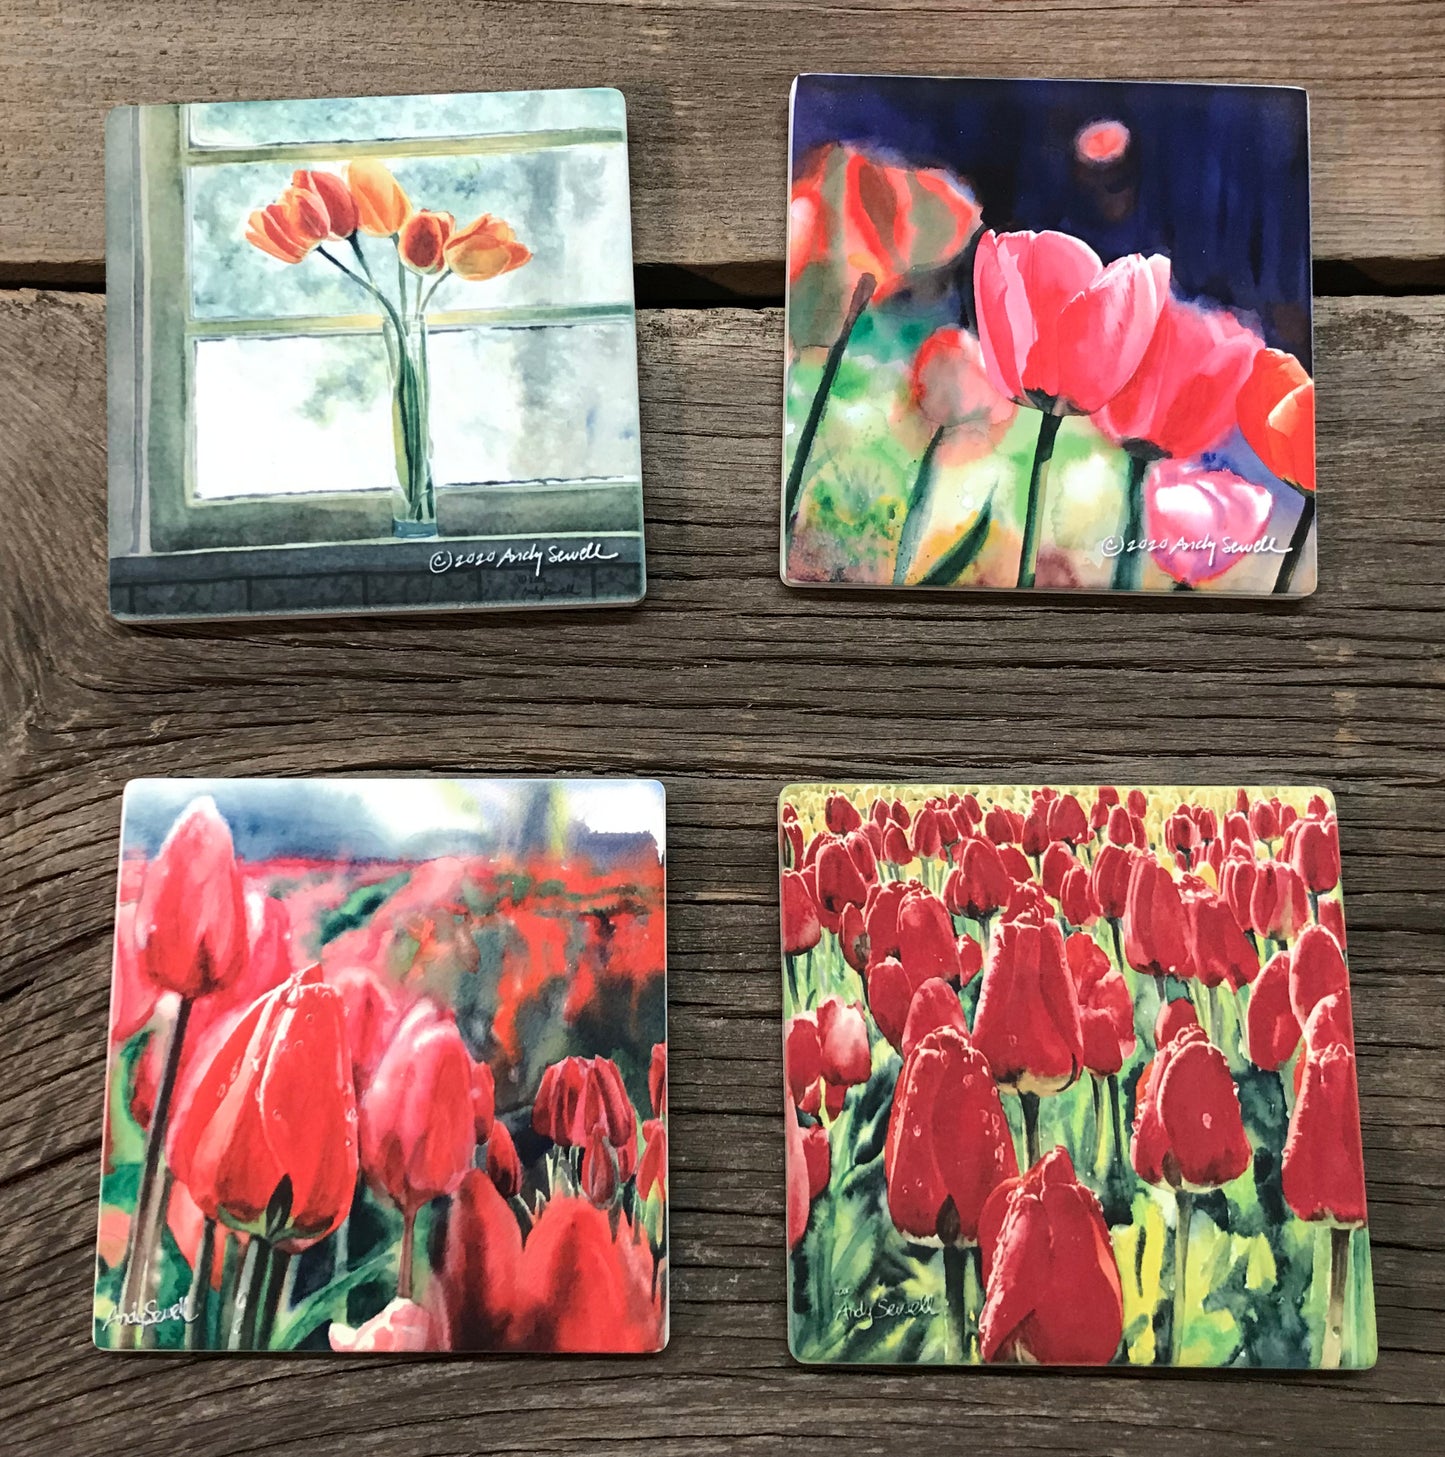 "Garden Sunflowers/Tulips " themed coaster sets: 2 options, see below.